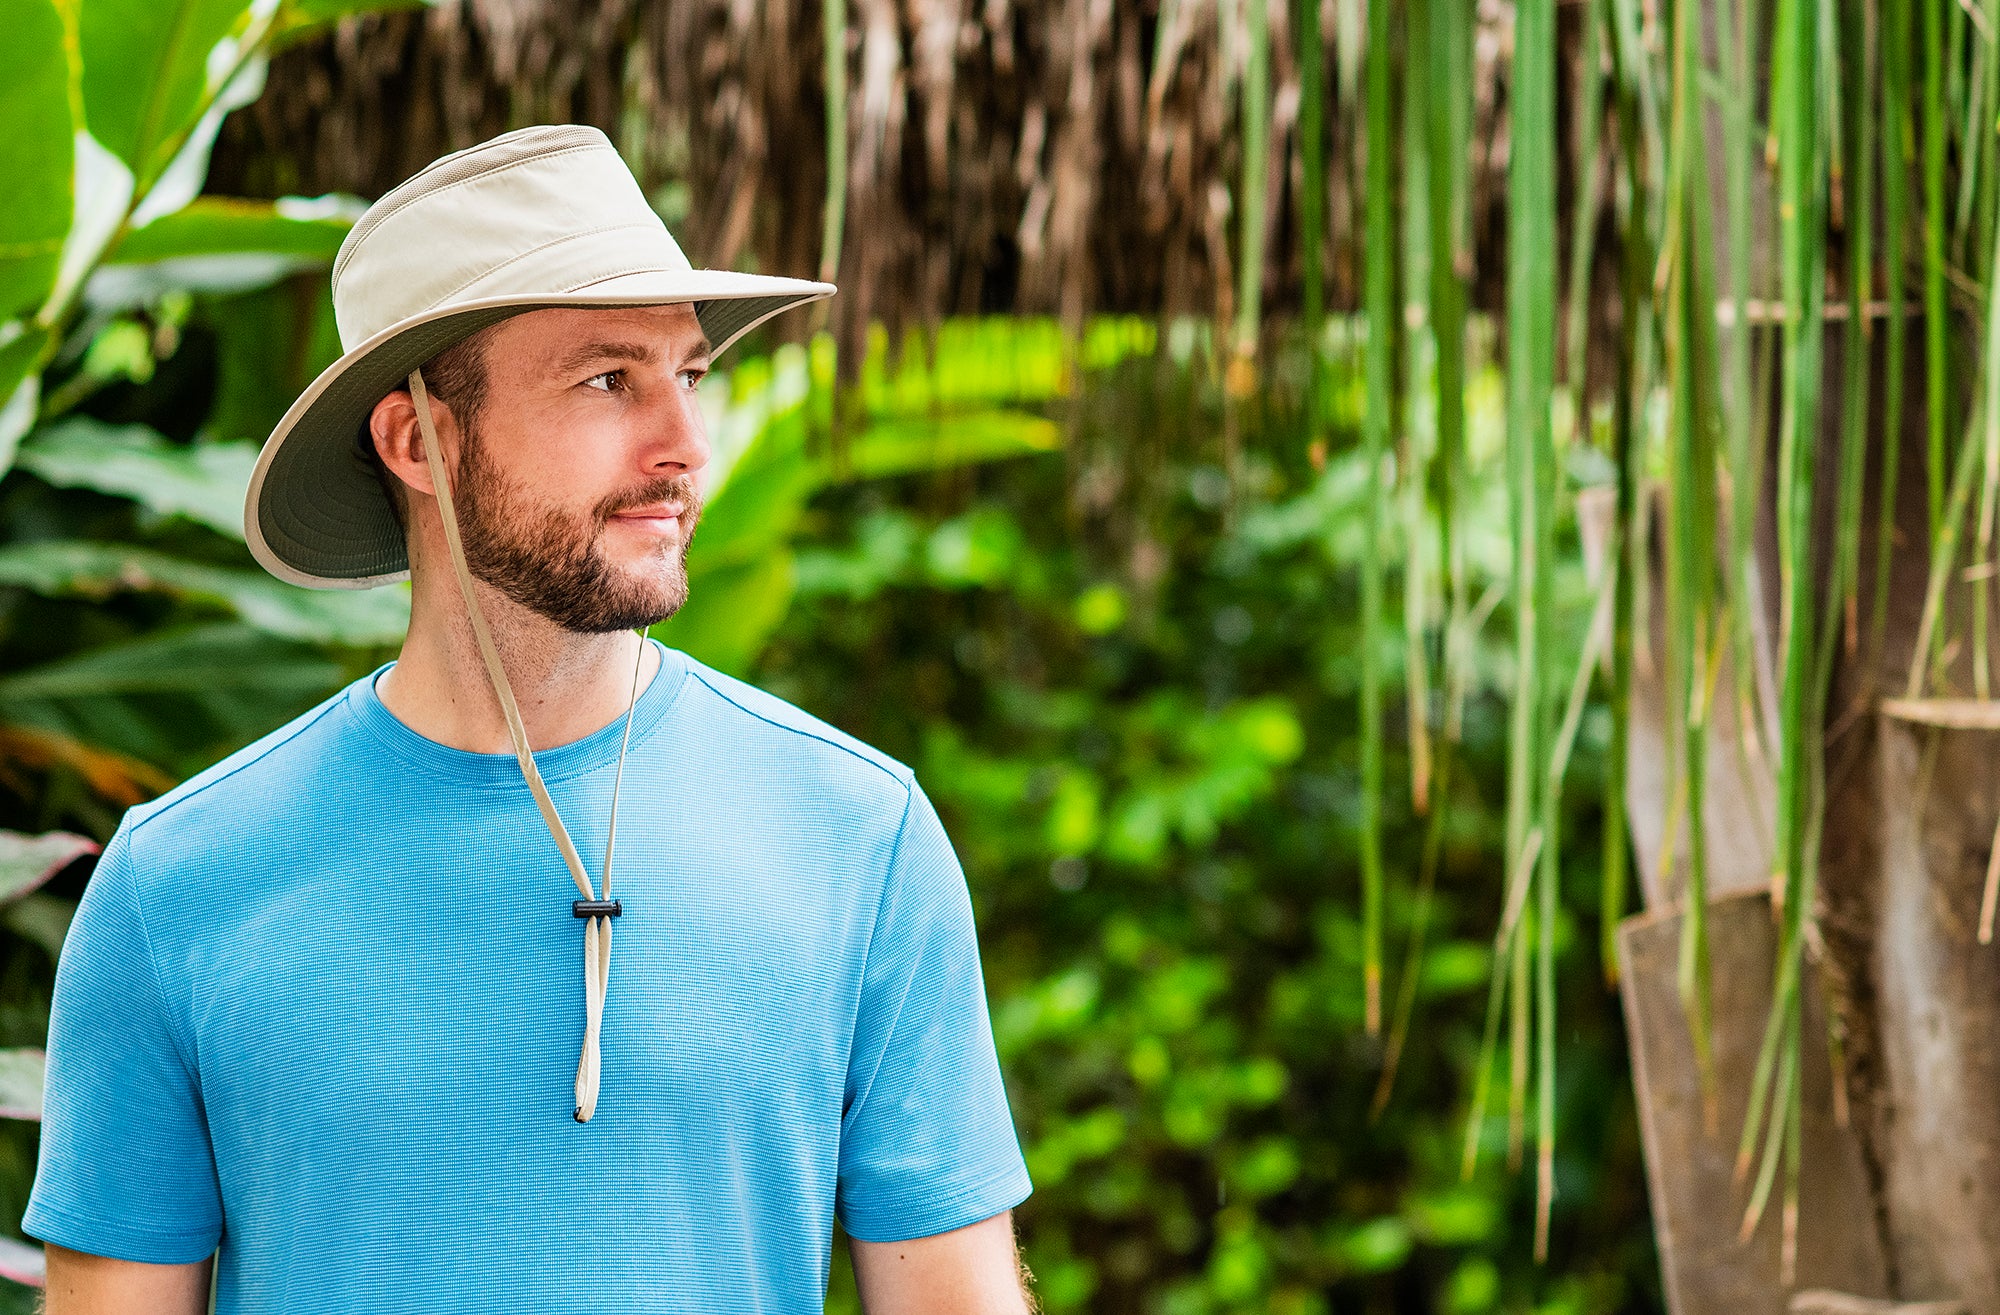 Man outdoors with the Summit summer sun hat by Wallaroo, with uv protection designed for travel